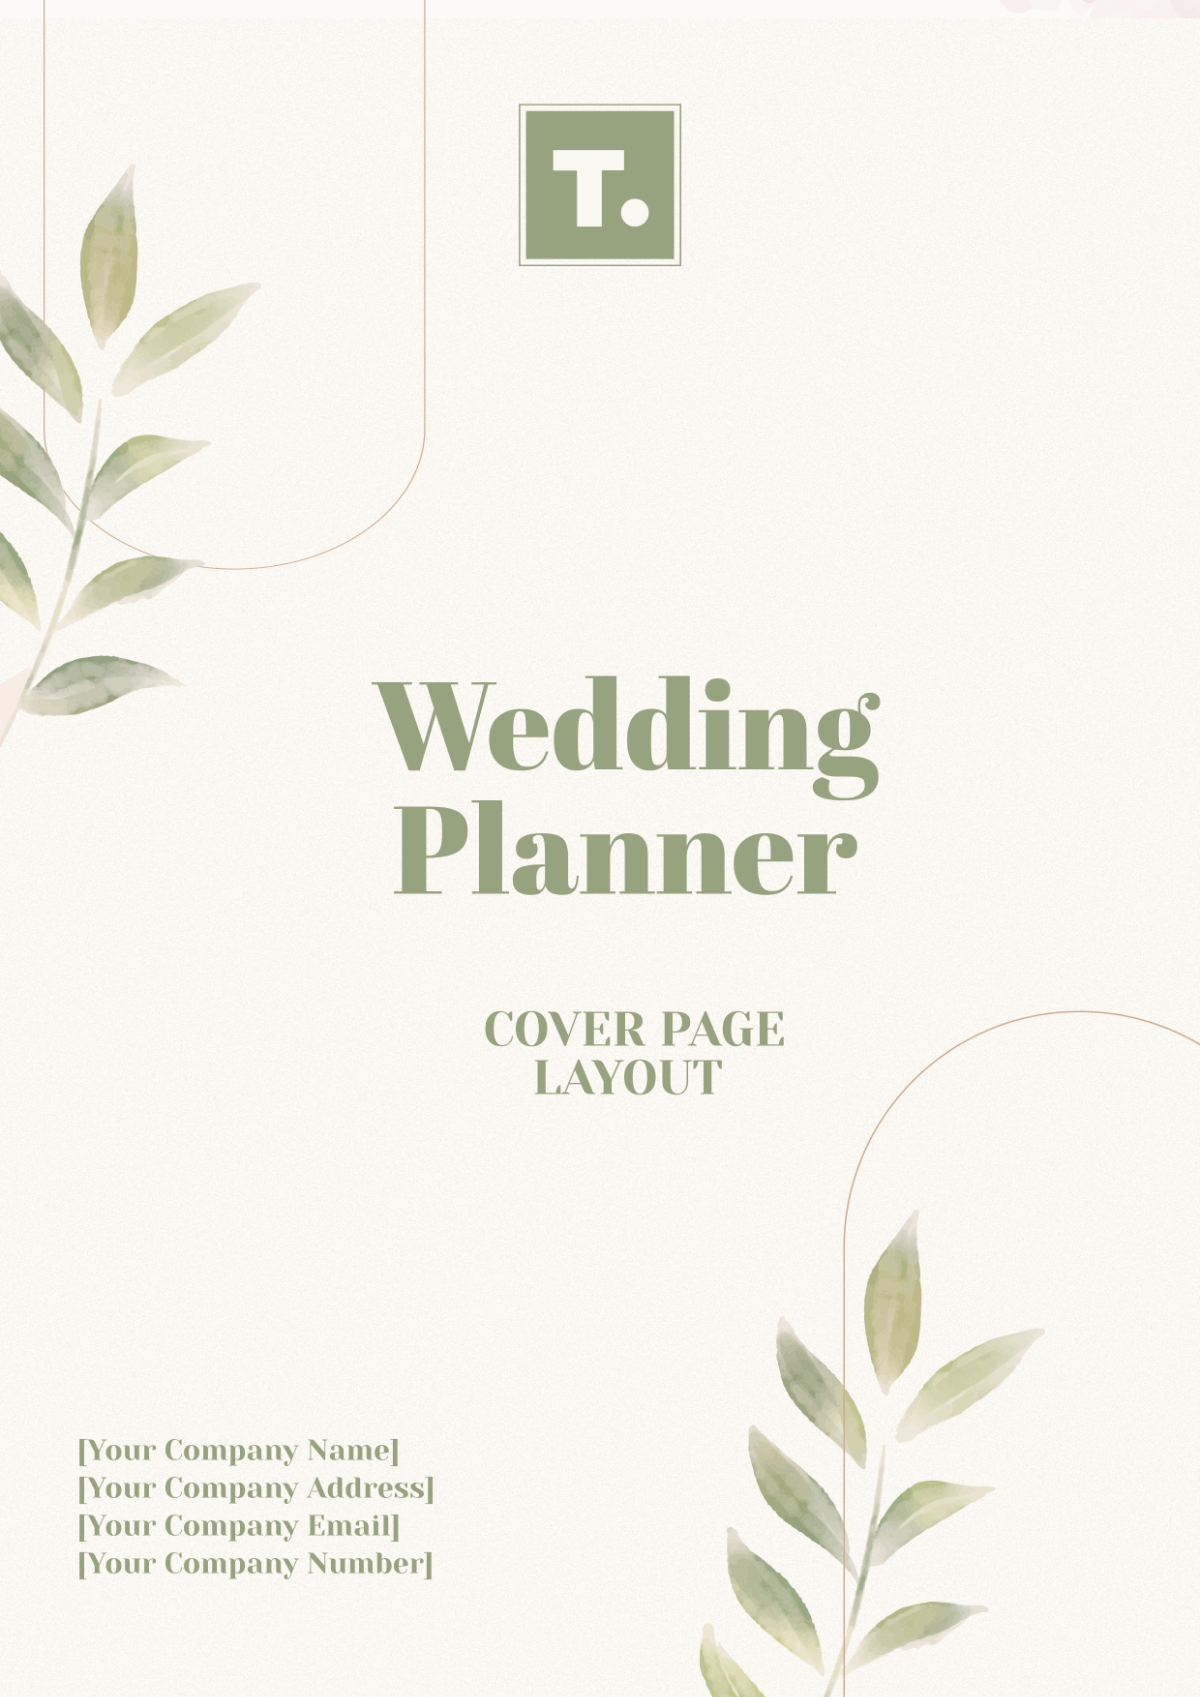 Wedding Planner Cover Page Layout